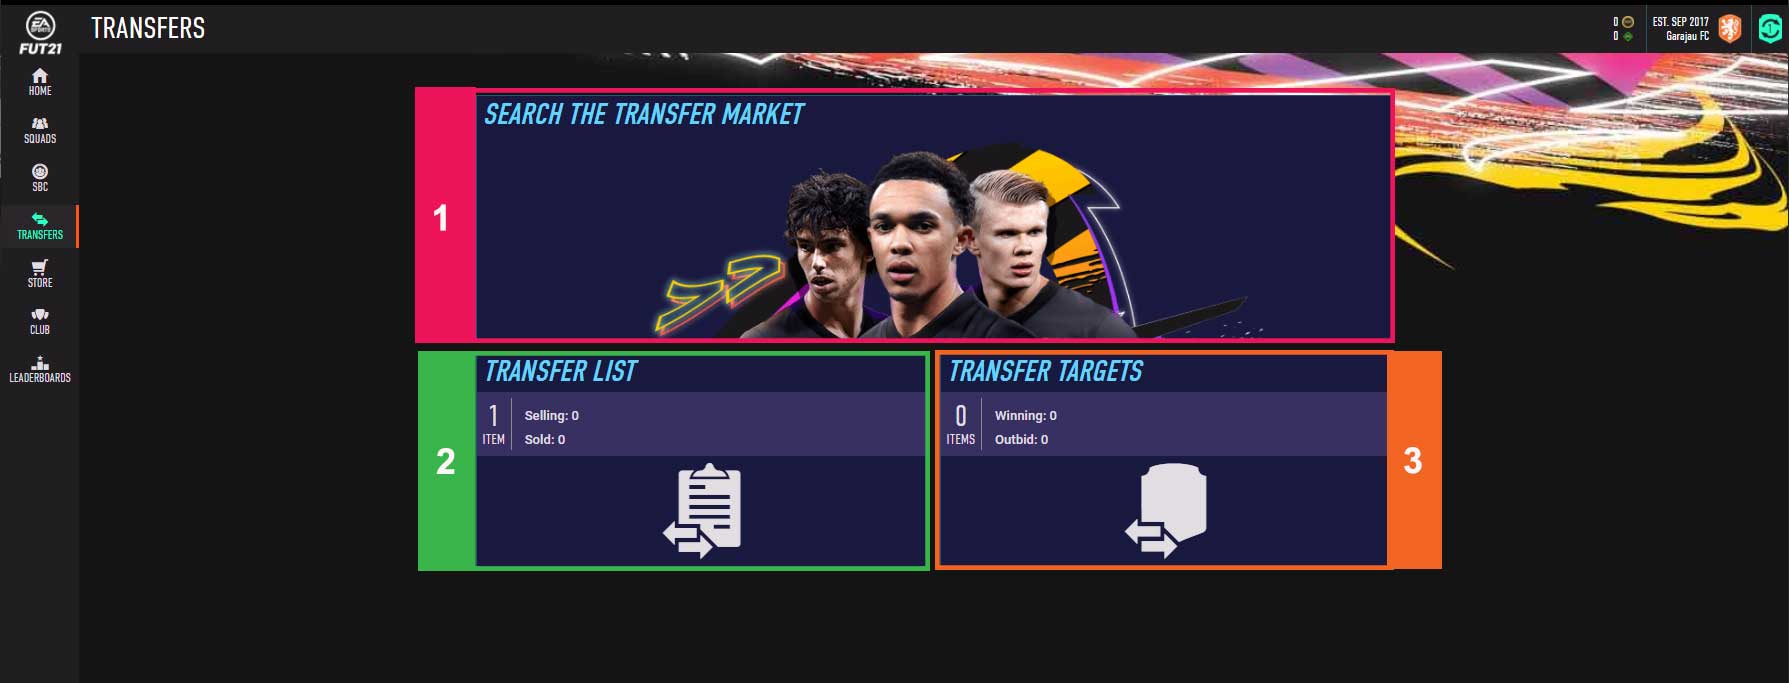 FIFA 22 Web App release date live - What time does FIFA FUT Web